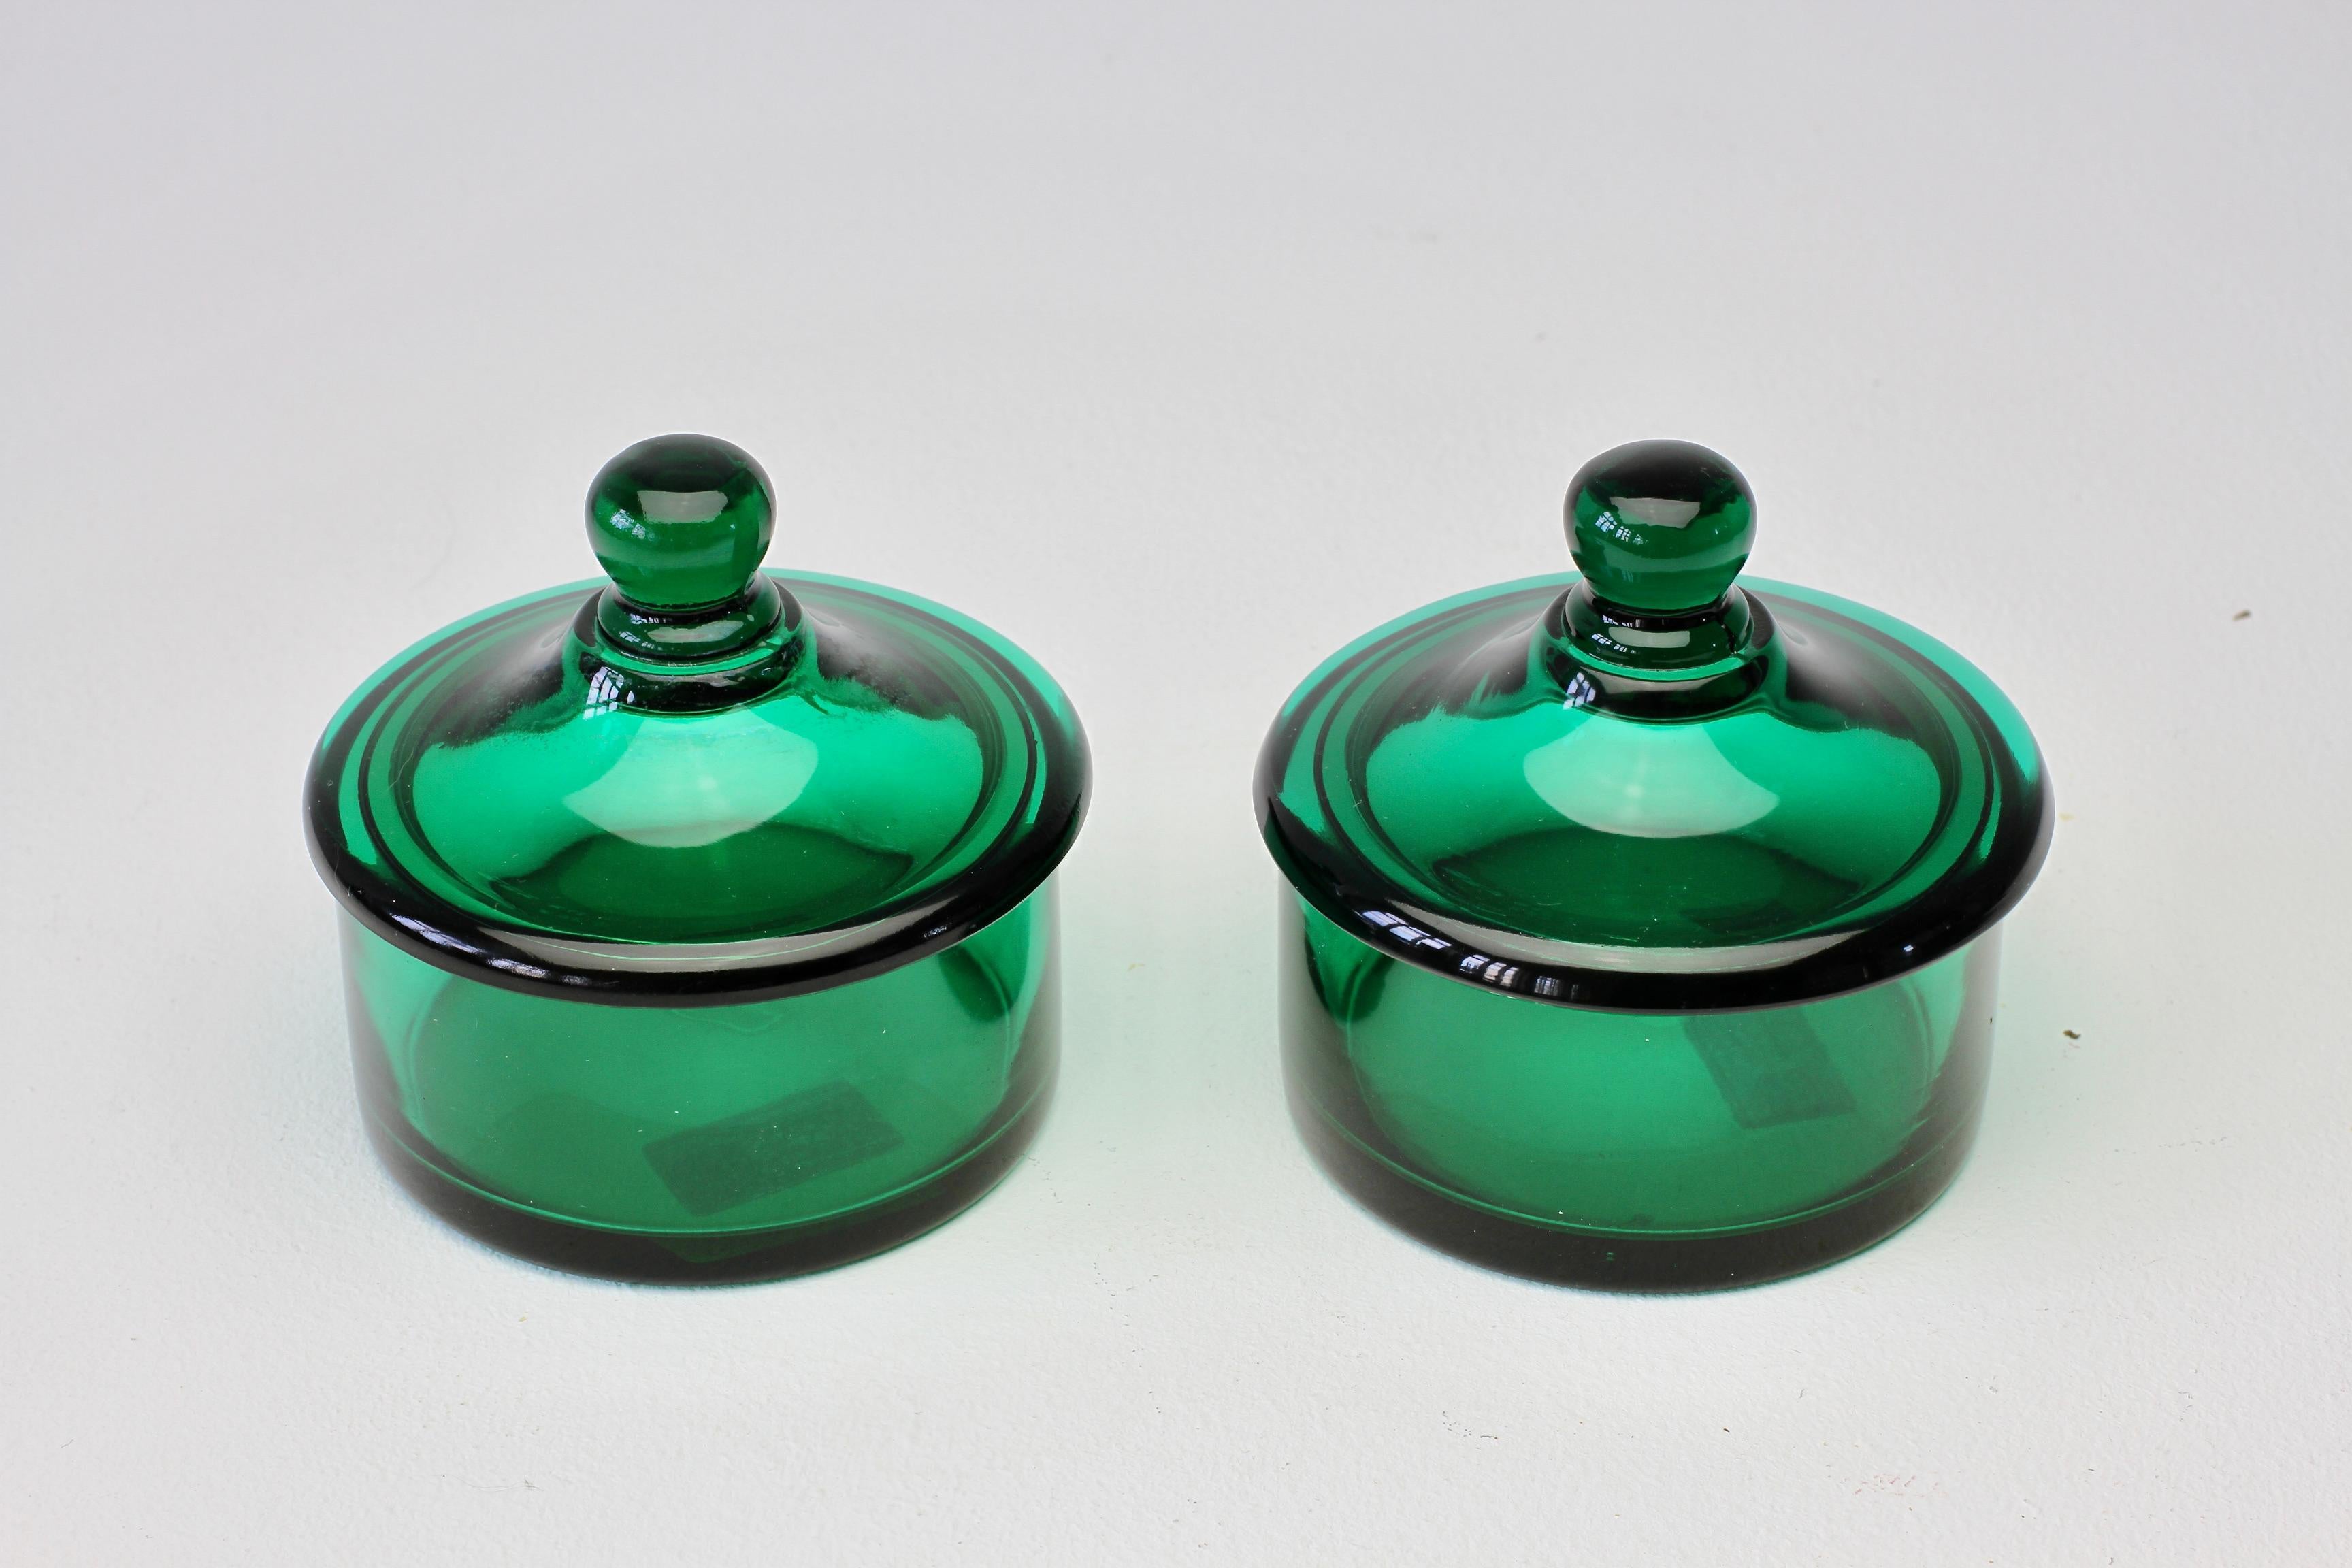 Cenedese vintage midcentury pair of new old stock Murano clear/translucent emerald green colored / coloured glass round Apothecary jars or storage containers with lids made circa 1970 with original paper labels attached. Wonderful Italian glass and